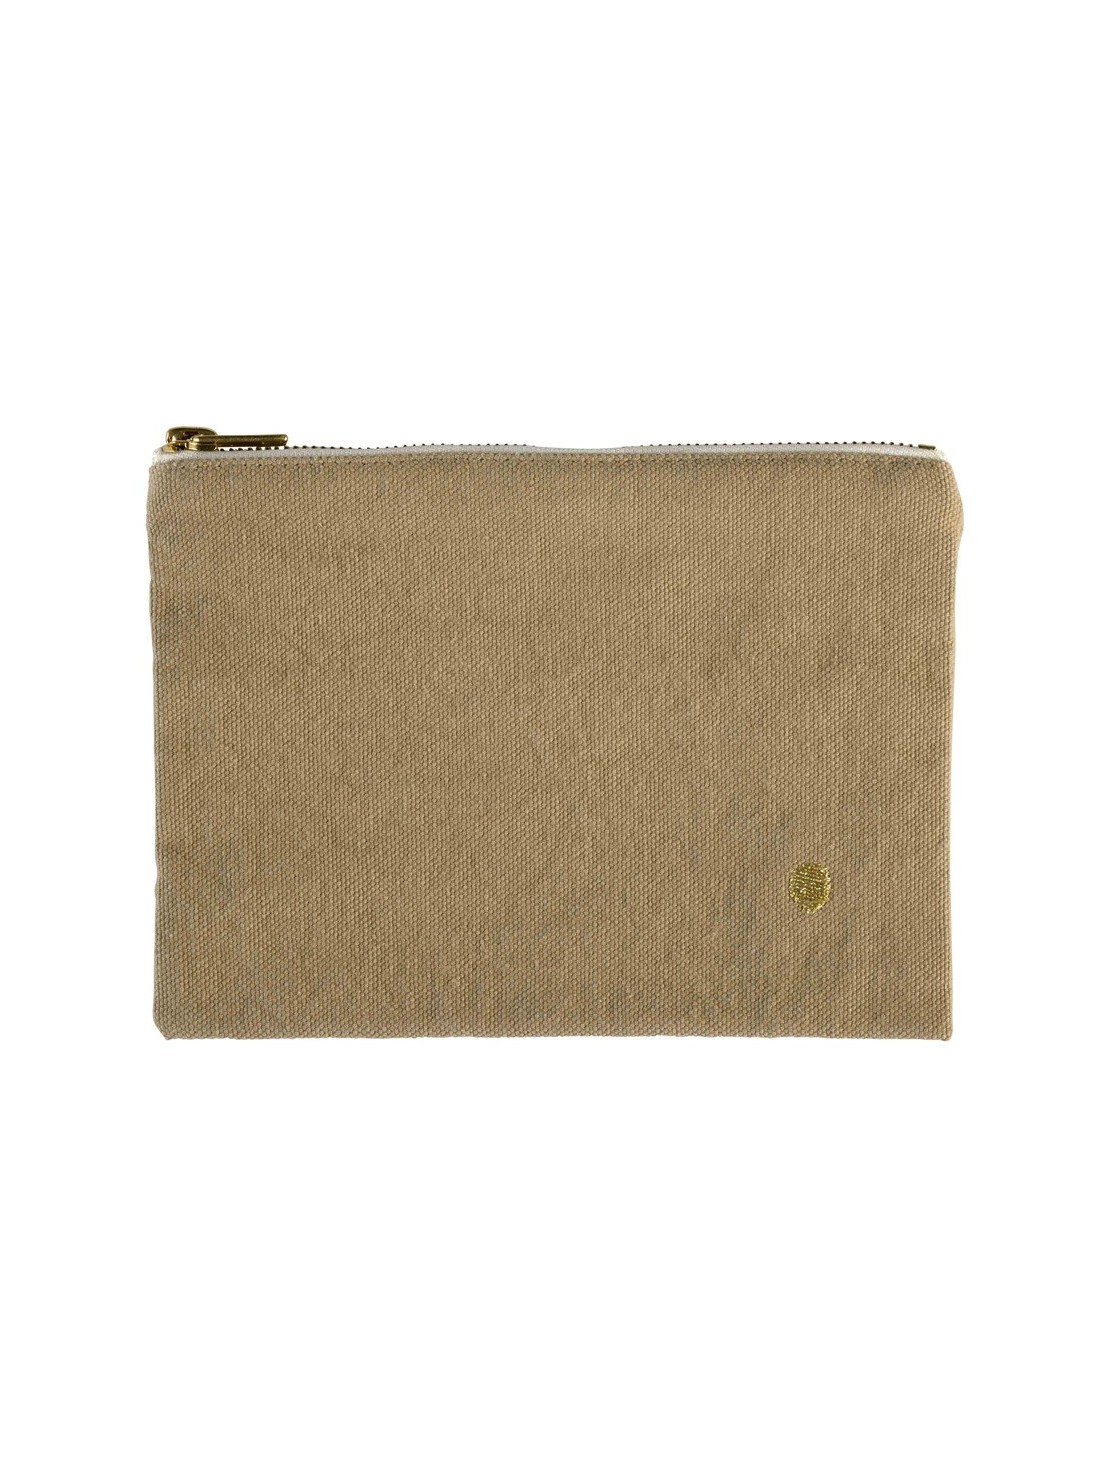 POUCH IONA GINGER M